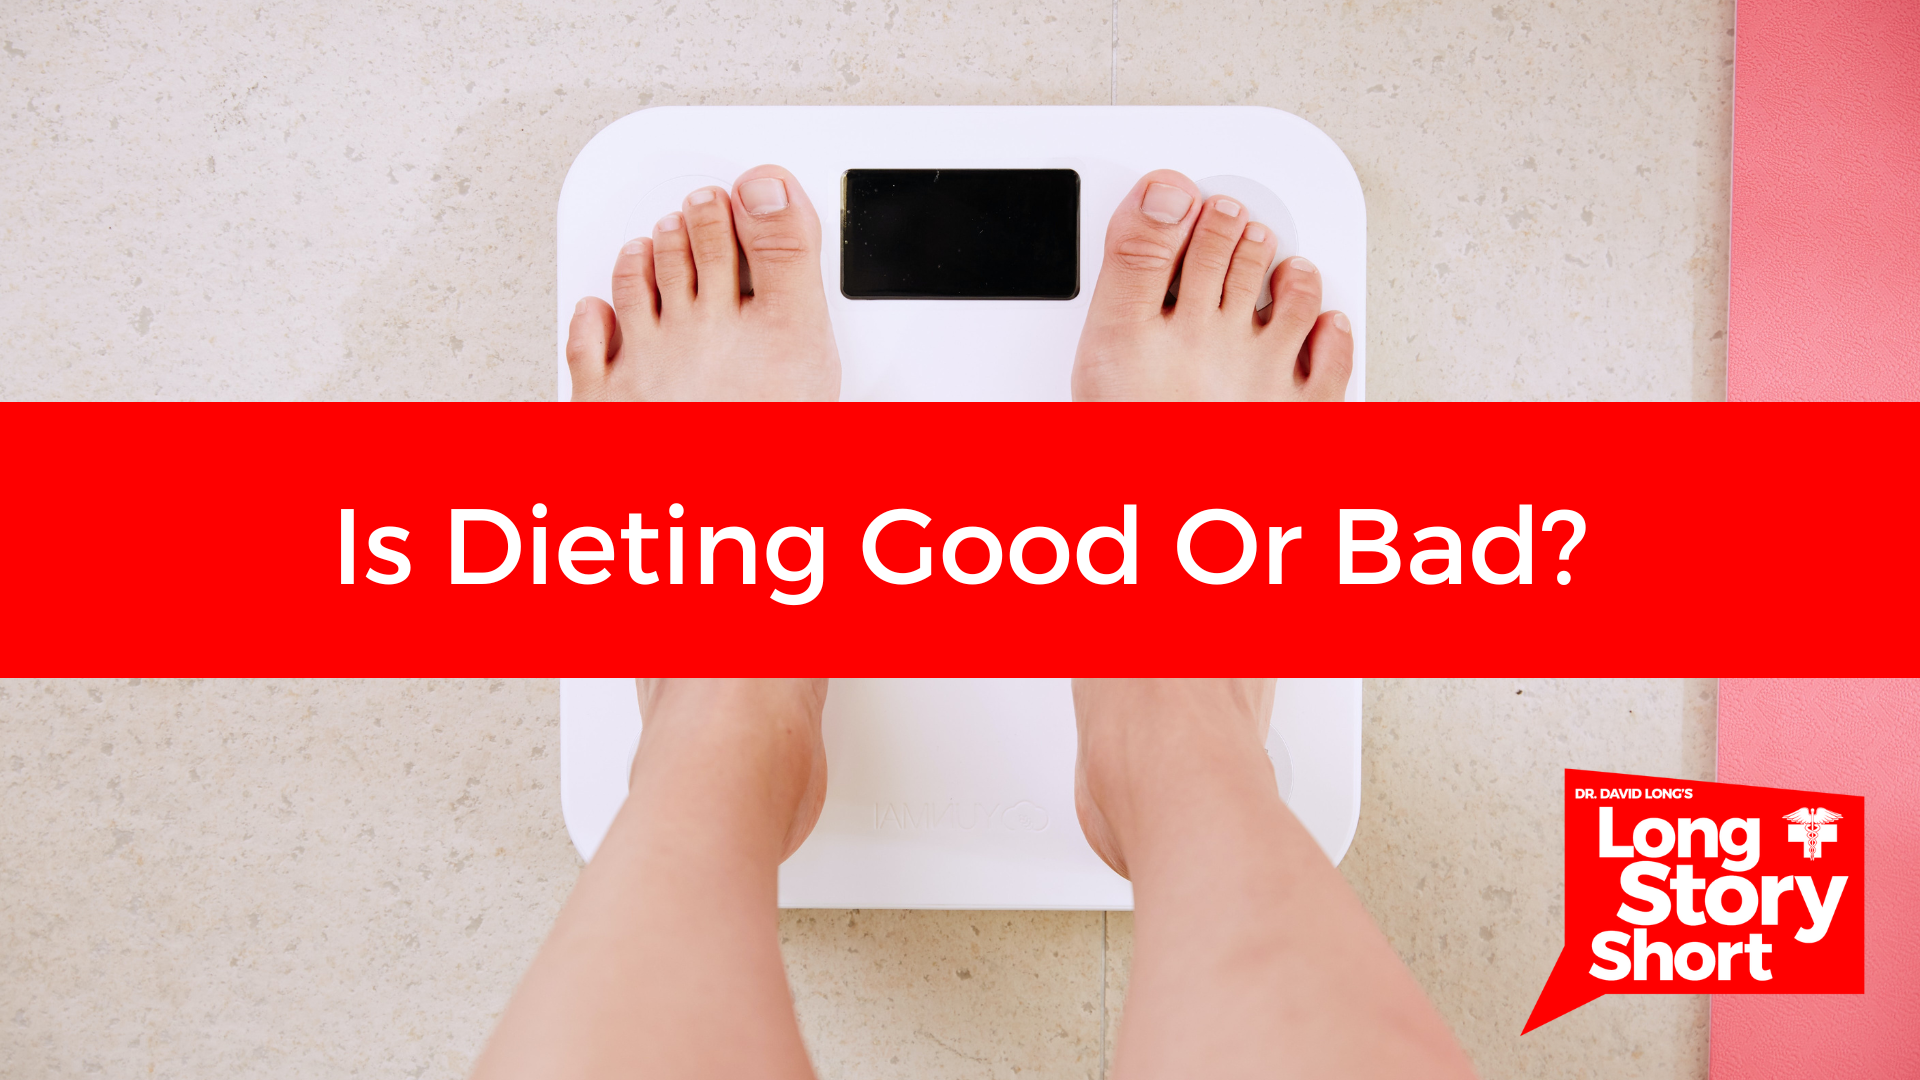 You are currently viewing Is Dieting Good or Bad? – Dr. David Long